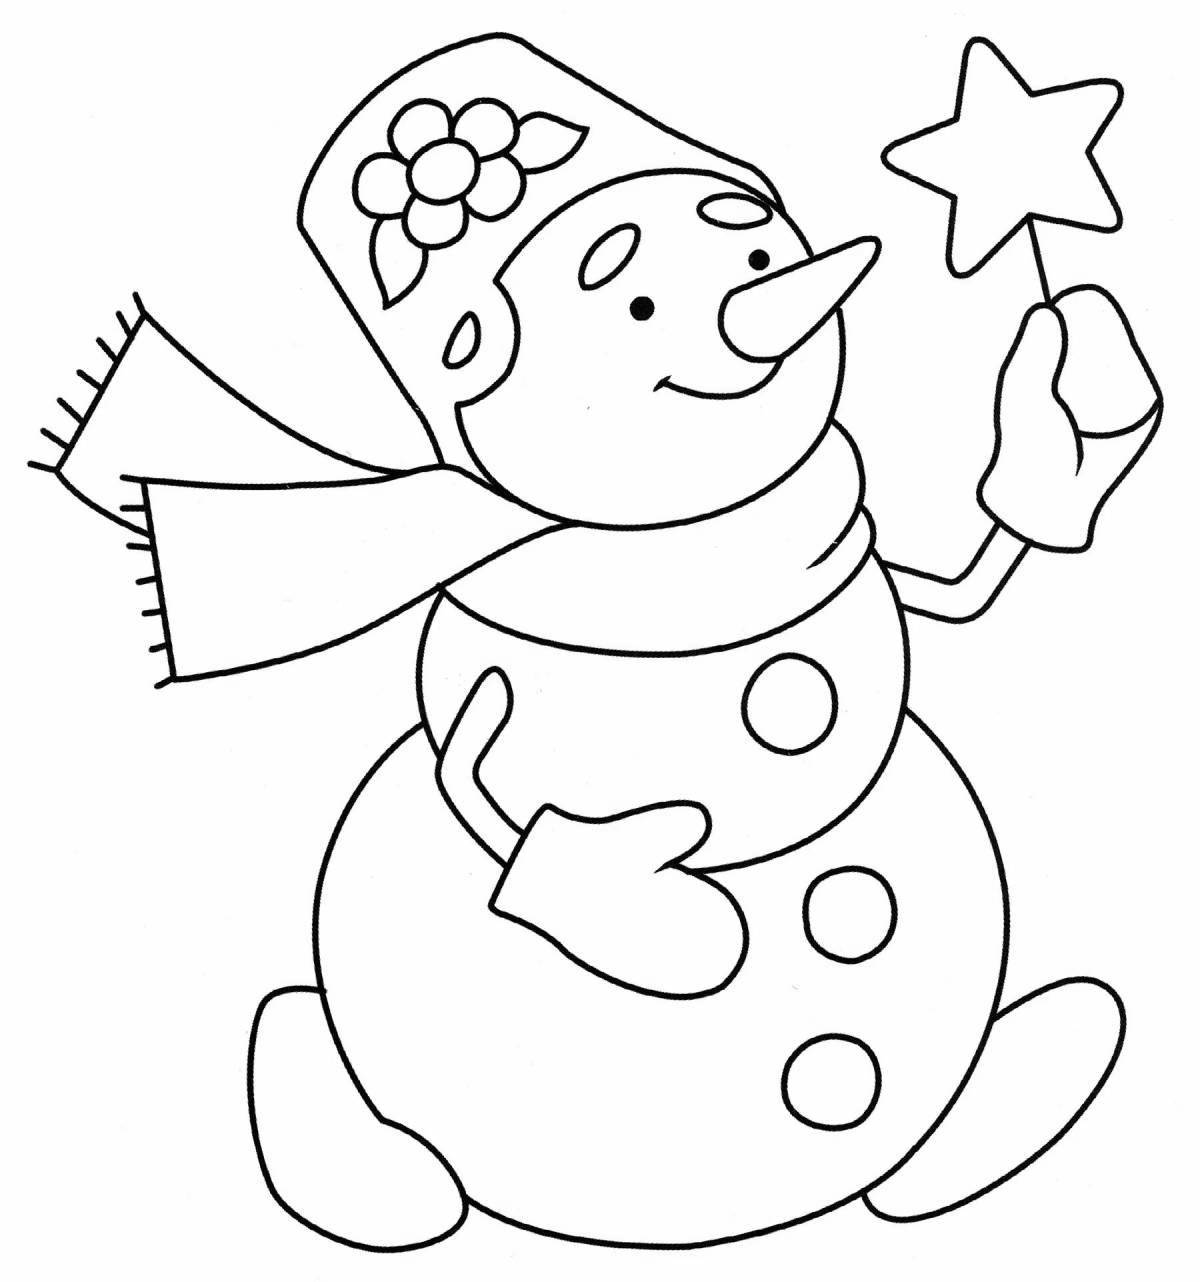 Playful coloring funny snowman